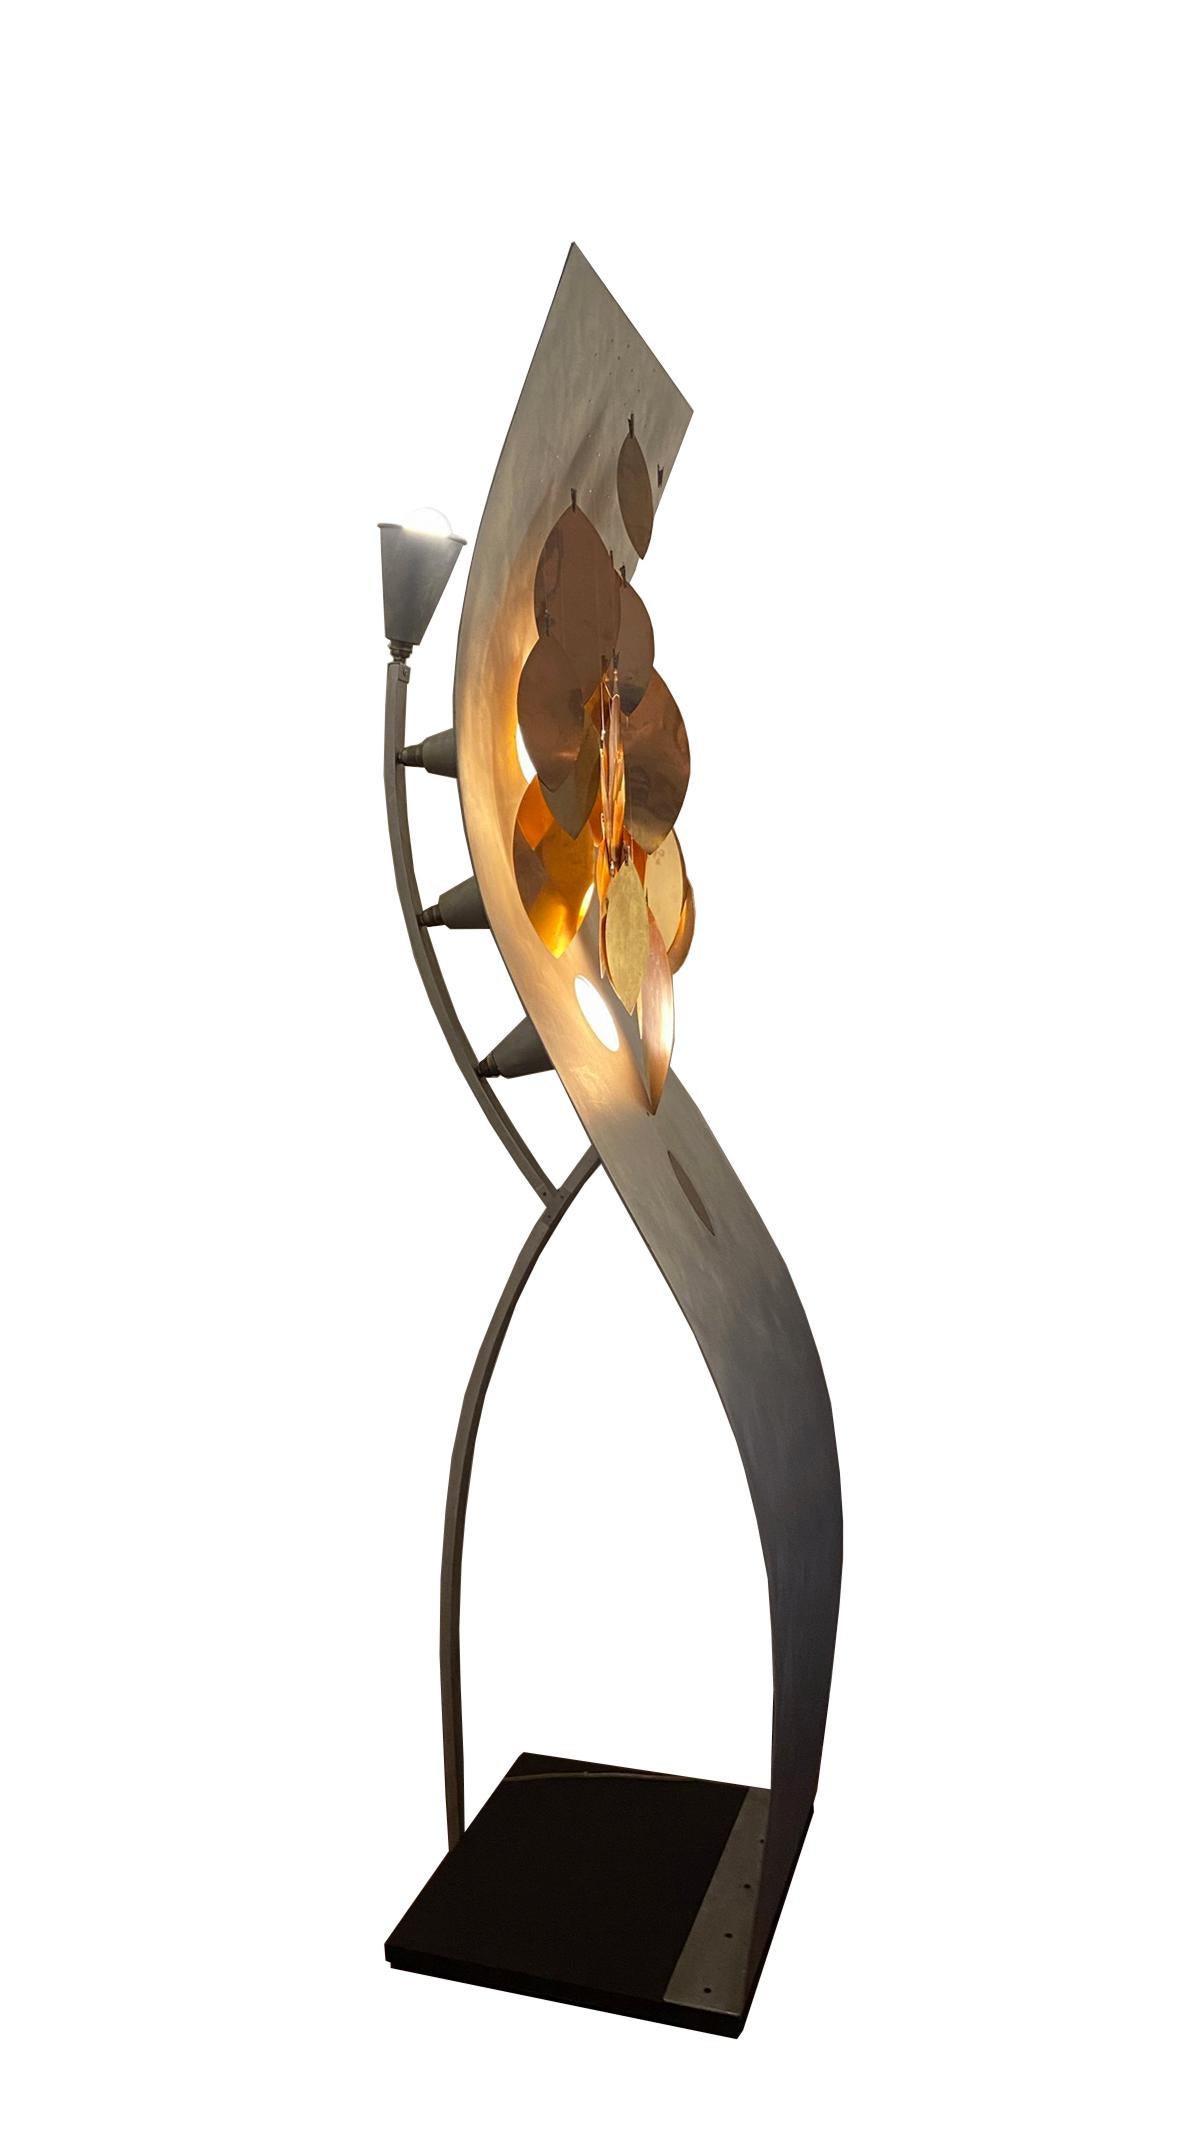 Mid-Century Modern Riccardo Dalisi Attr. Sculpture Floor Lamp with Copper Leaves, Italy, 1980s For Sale